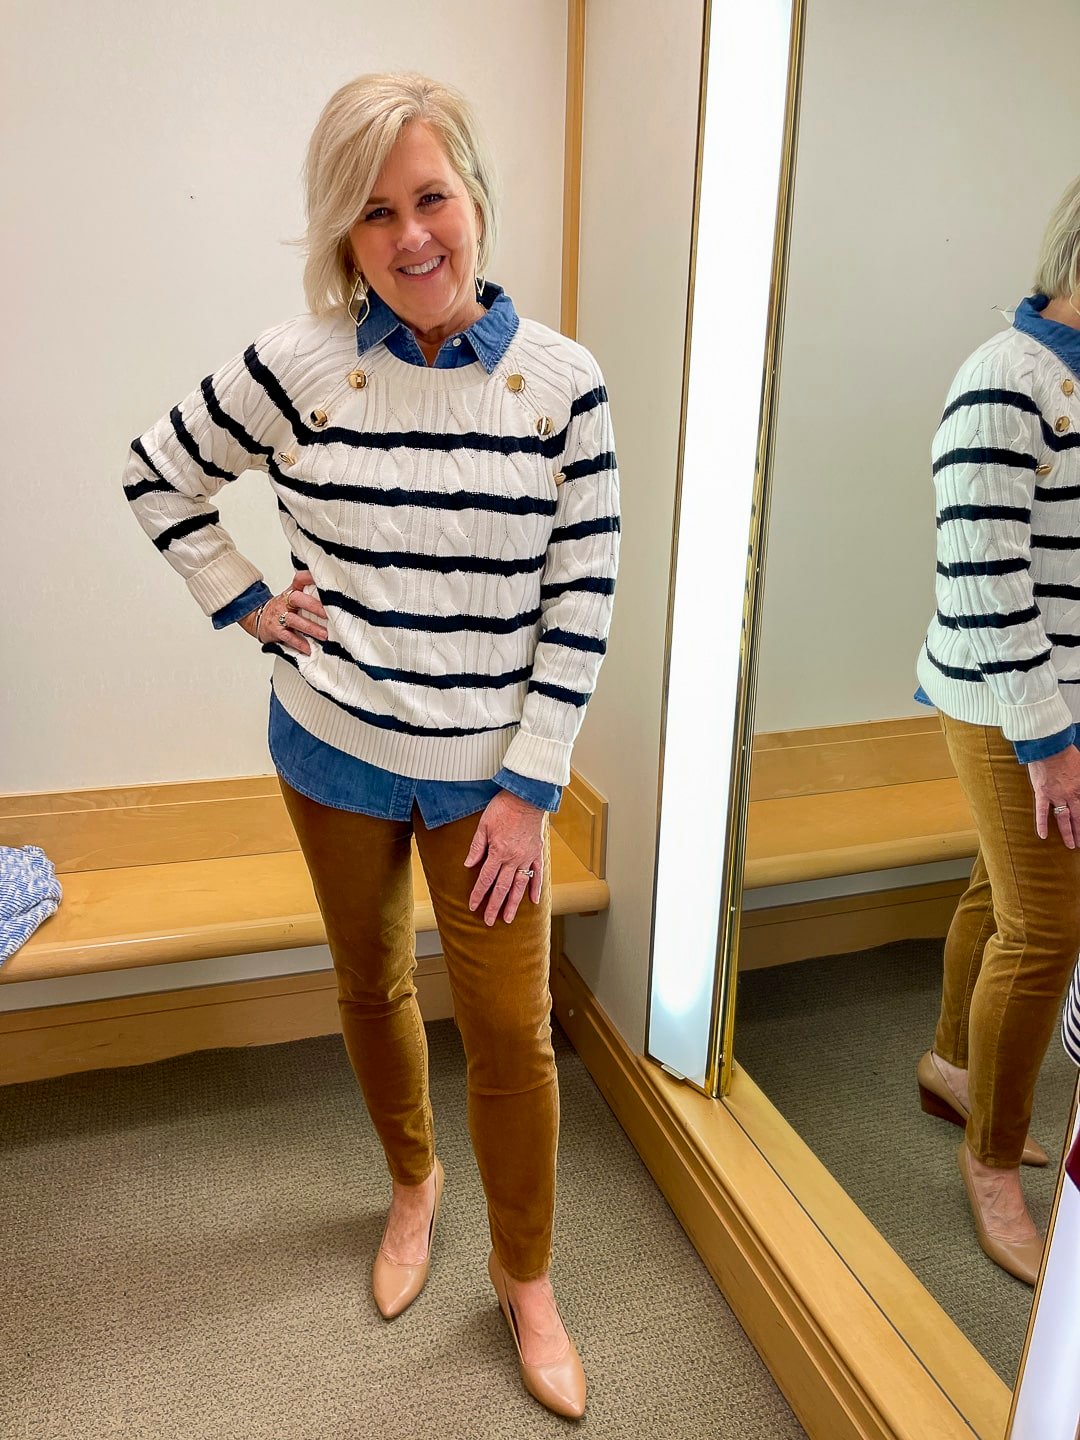 Over 40 Fashion Blogger, Tania Stephens is doing a Try-On Haul for Talbot's Fall Collection August 2022